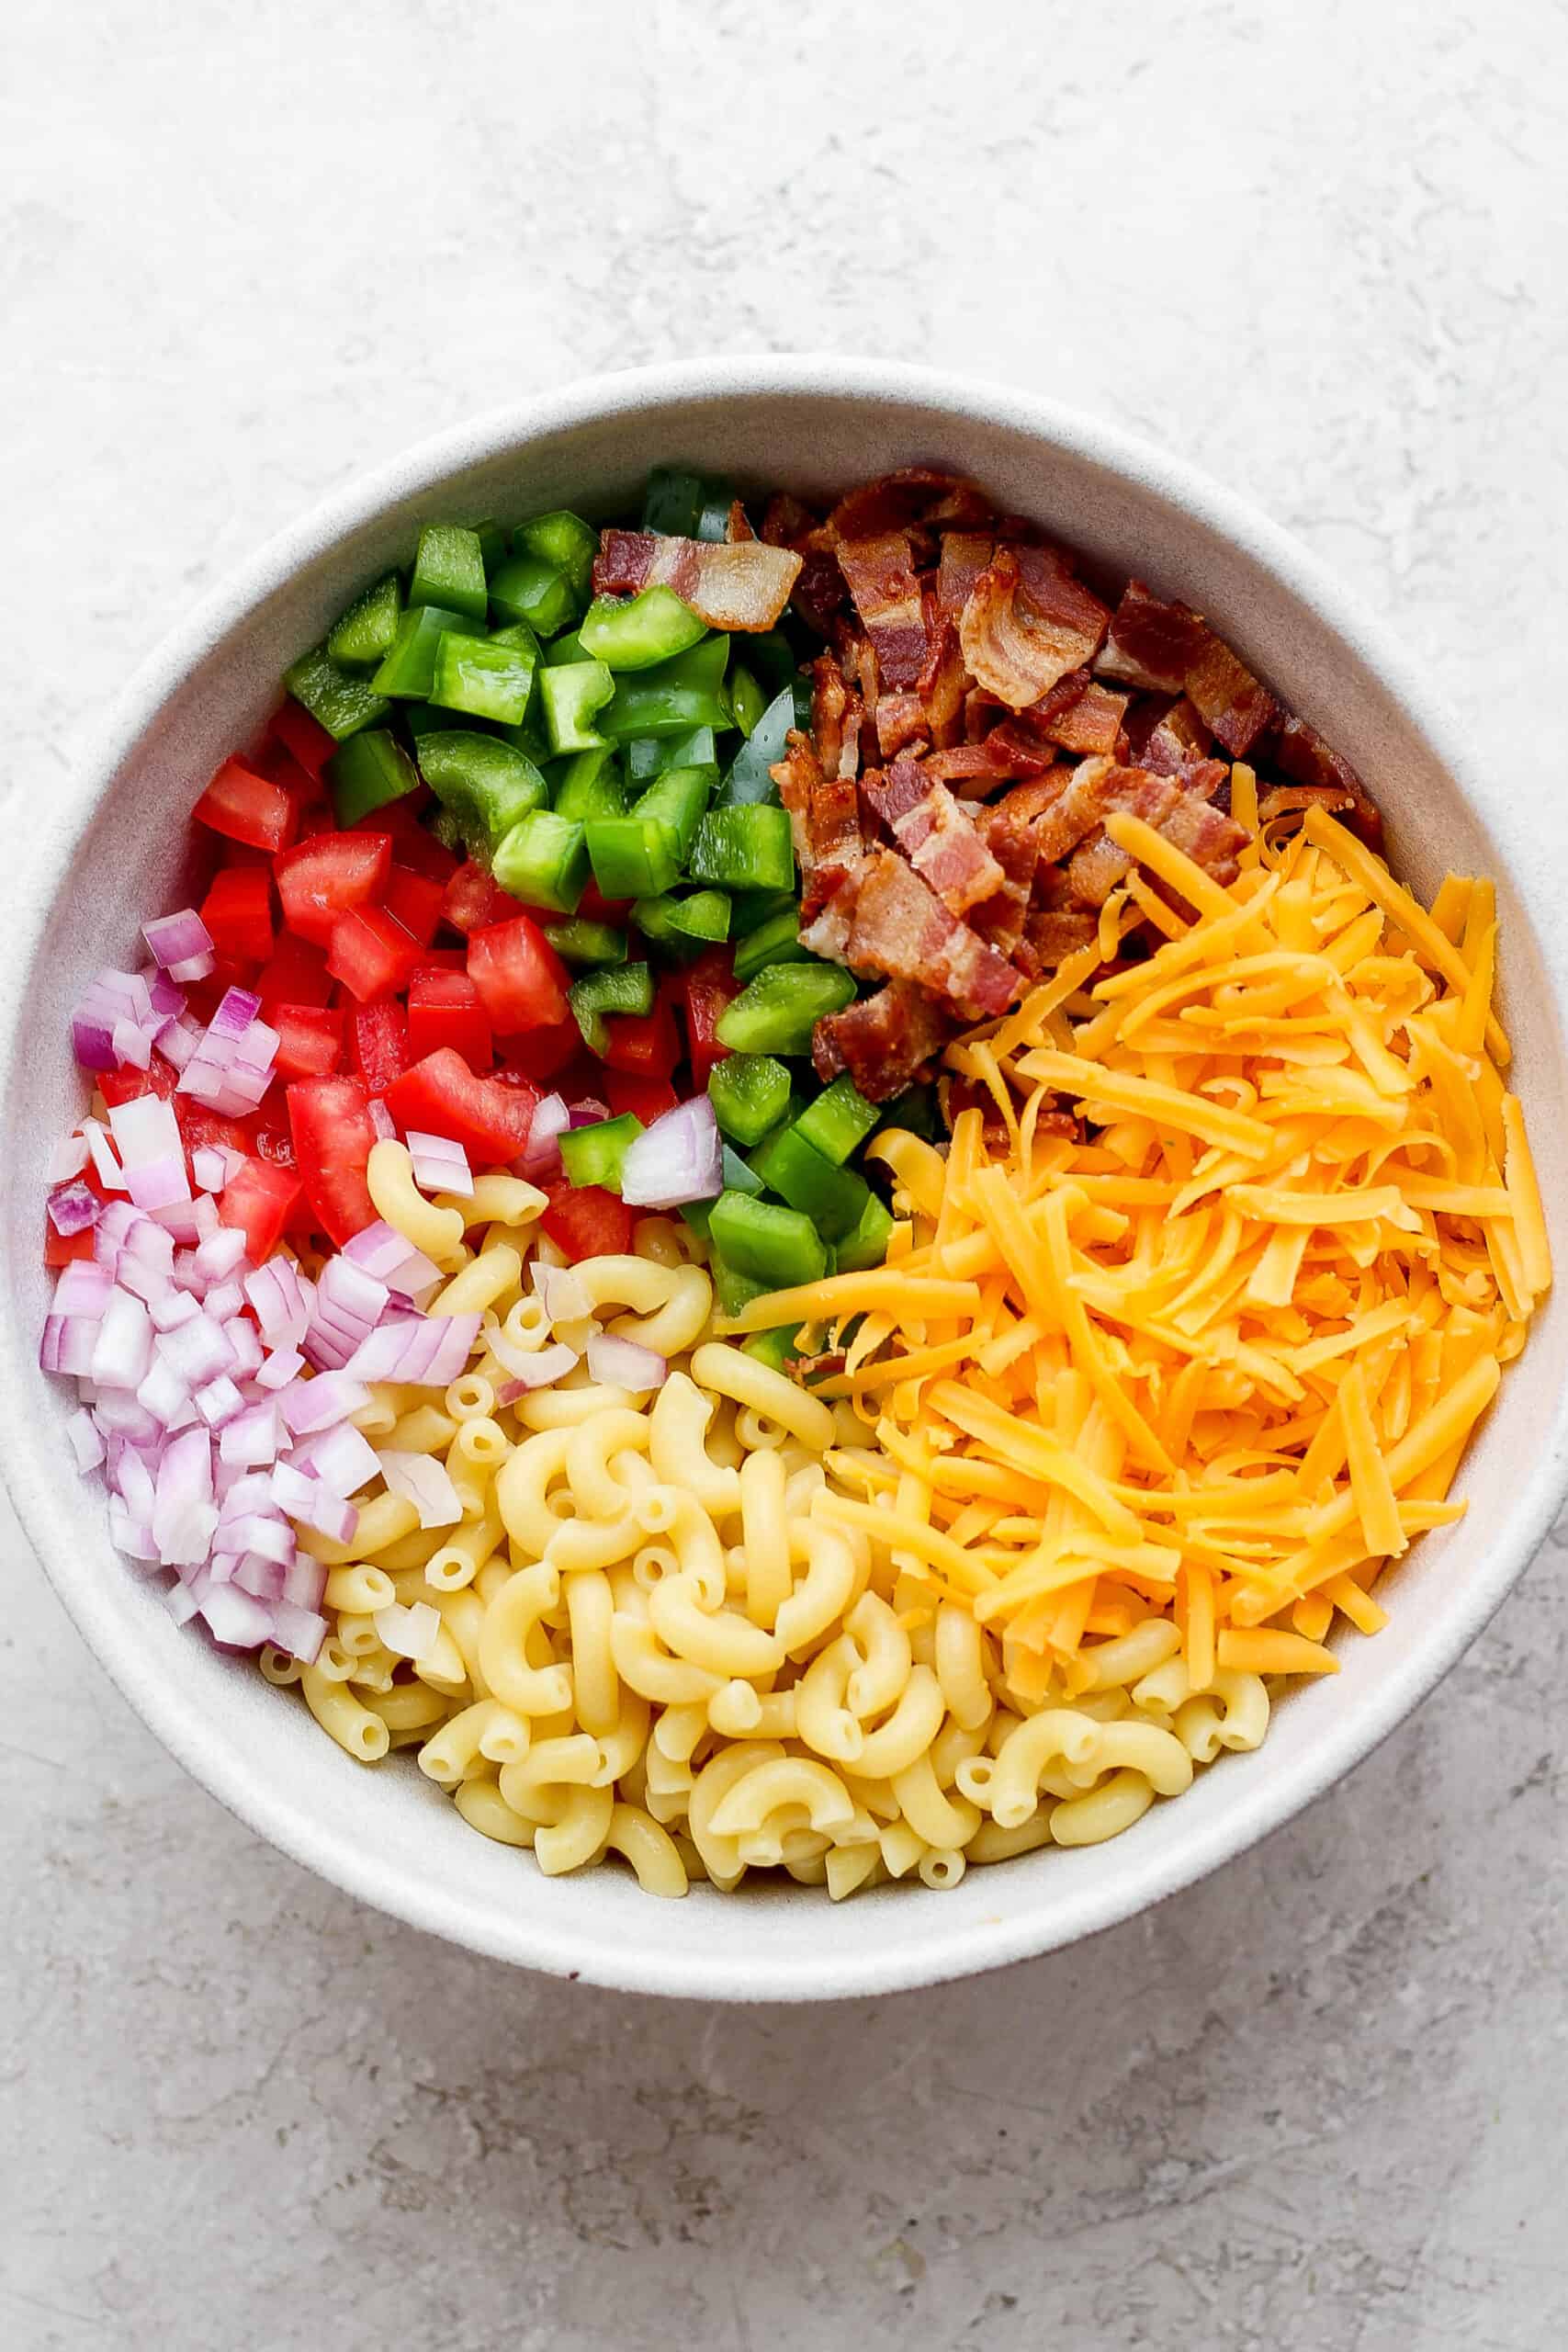 Components of a bacon ranch pasta salad including green onions, red onions, macaroni, cheddar cheese, pepper, and bacon are shown in a white bowl.